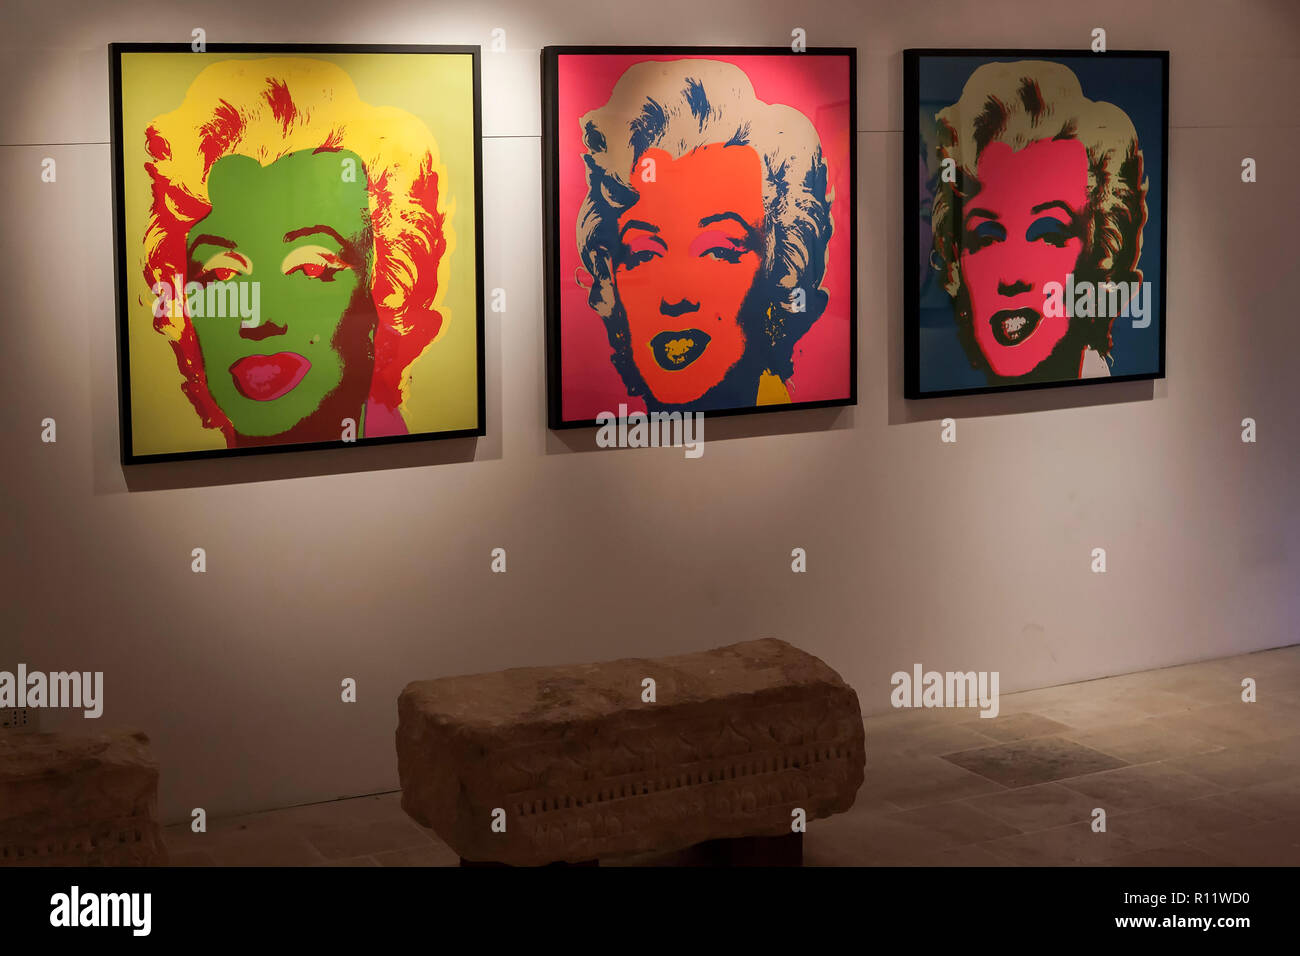 Andy Warhol exhibition, 'I Want to Be a Machine', in the Castello Aragonese, Otranto, Italy: three screenprints of Marilyn Monroe Stock Photo